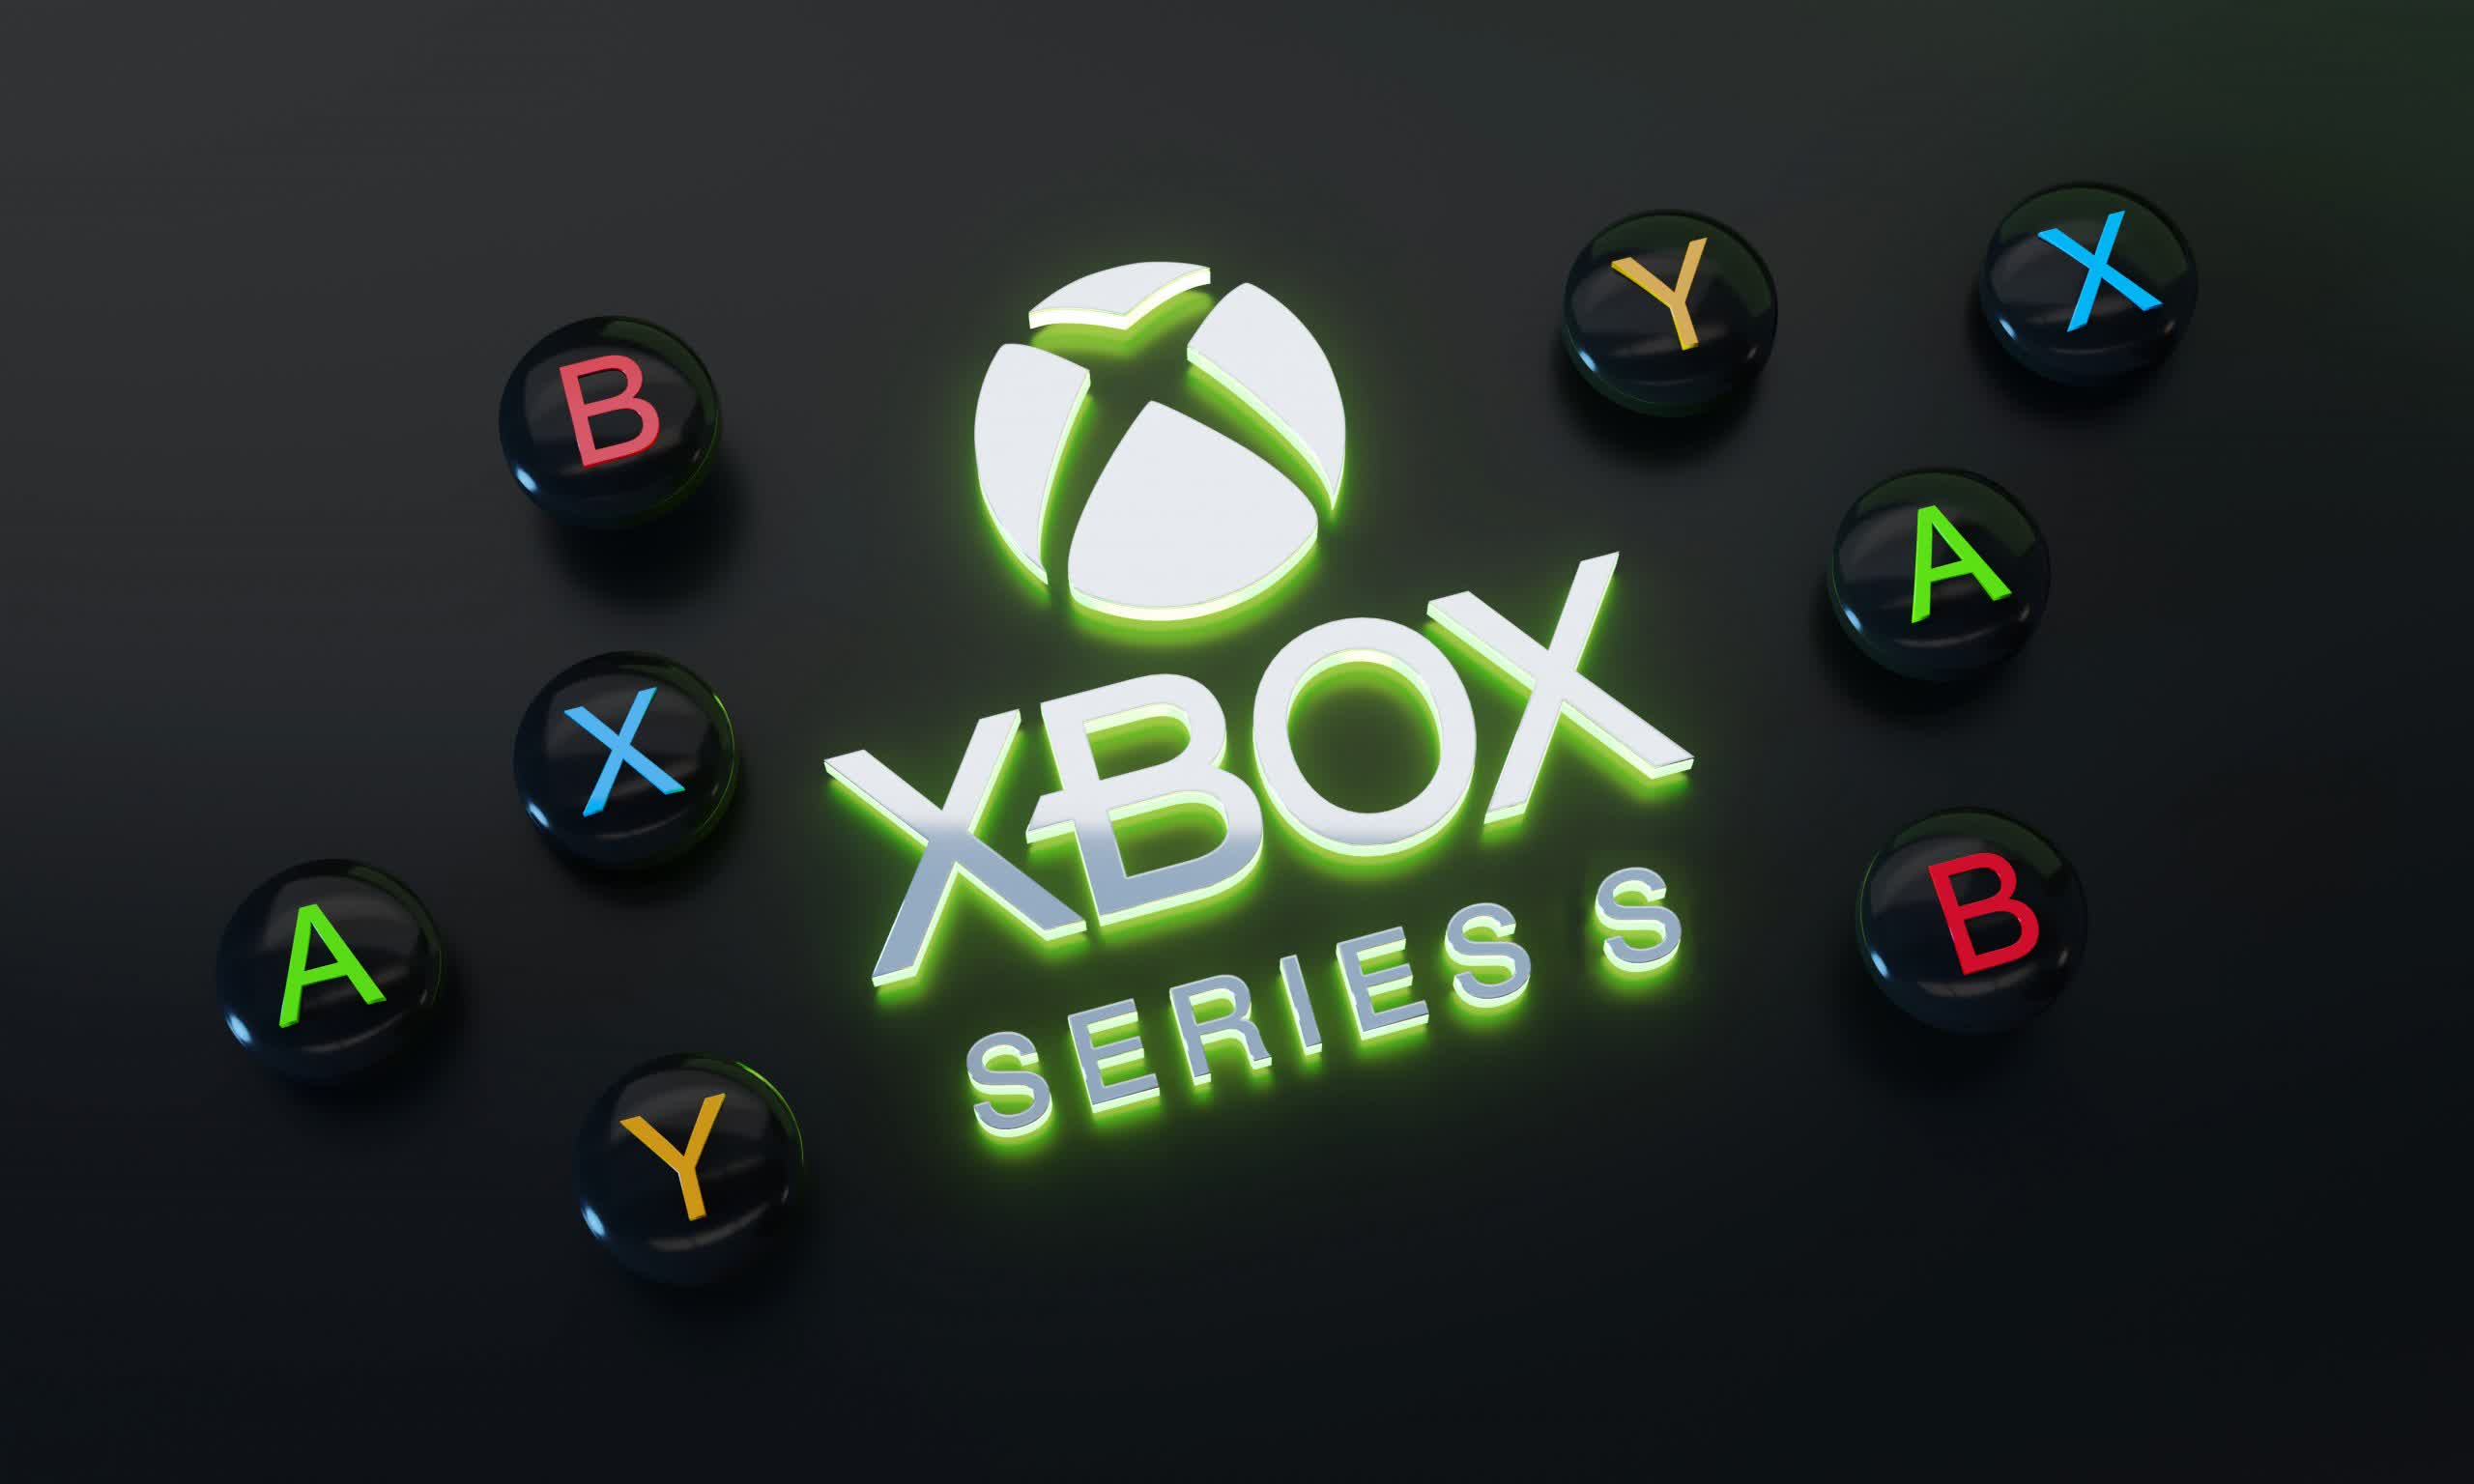 Xbox Series S Wallpapers